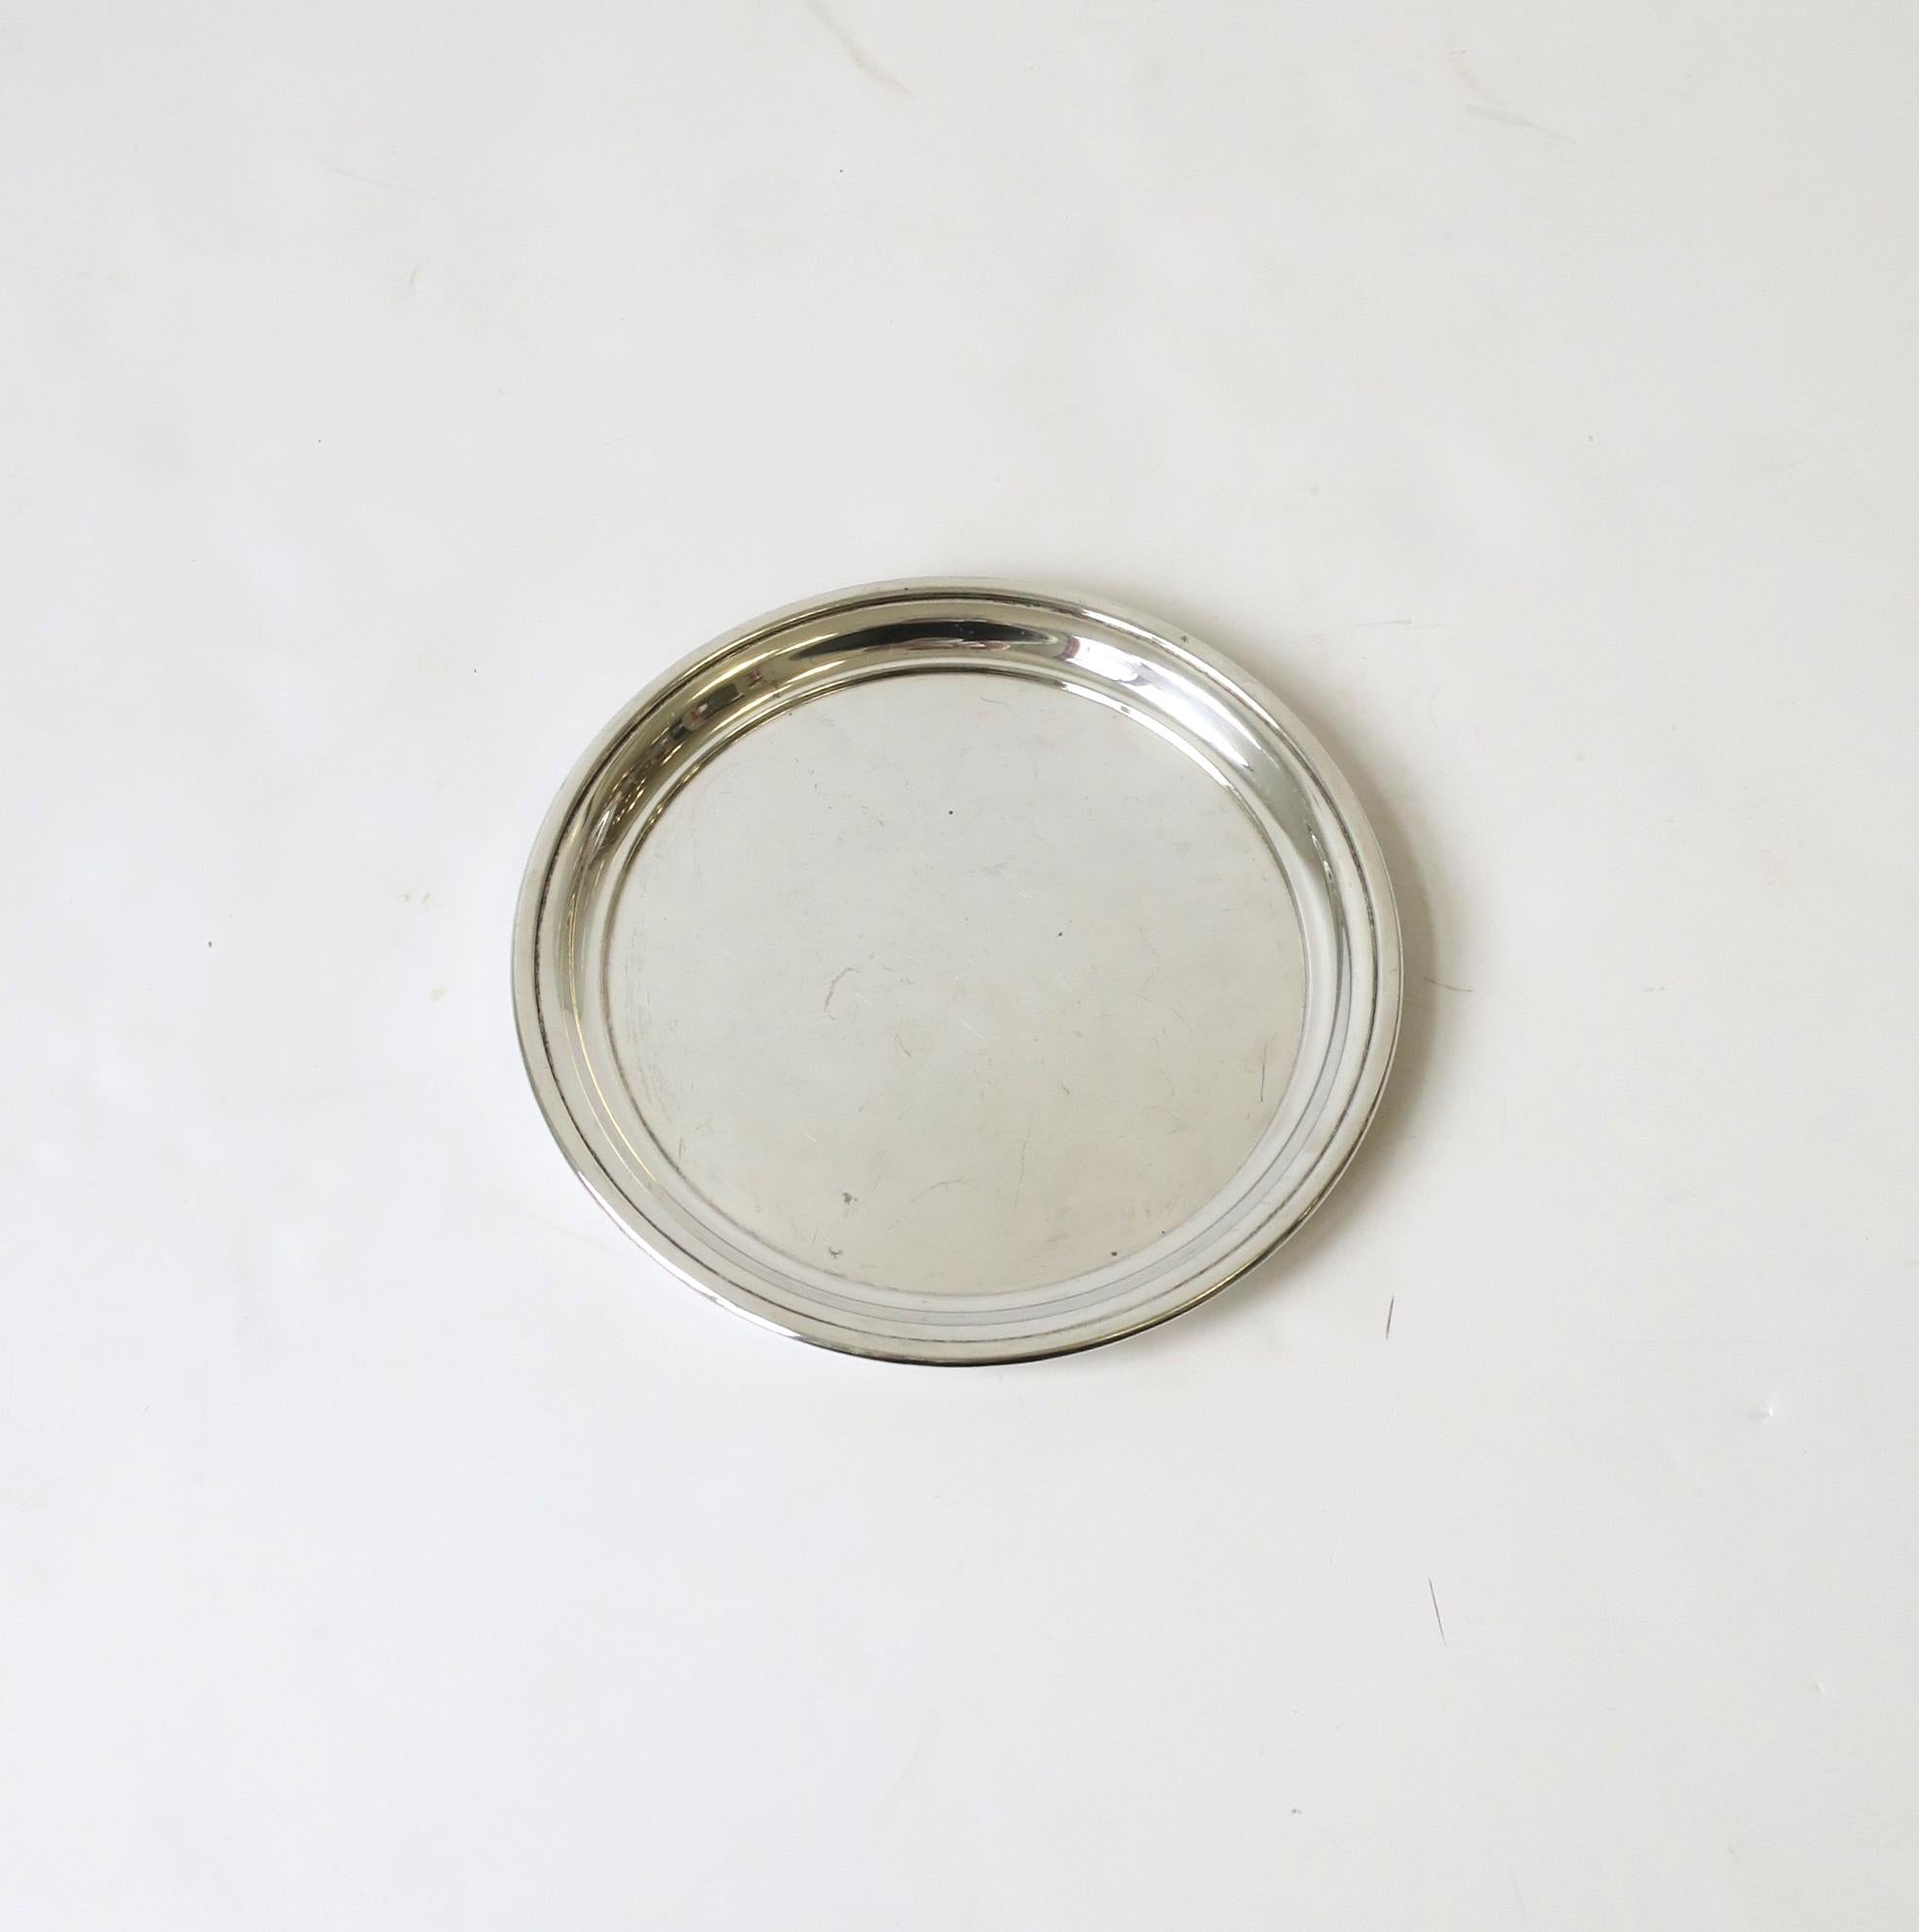 A round sterling silver tray from French luxury Maison Cartier, circa late-20th century, France. This round all sterling silvery tray is perfect to serve a cocktail or to hold jewelry on a vanity or nightstand, etc. Many uses. Piece is marked on